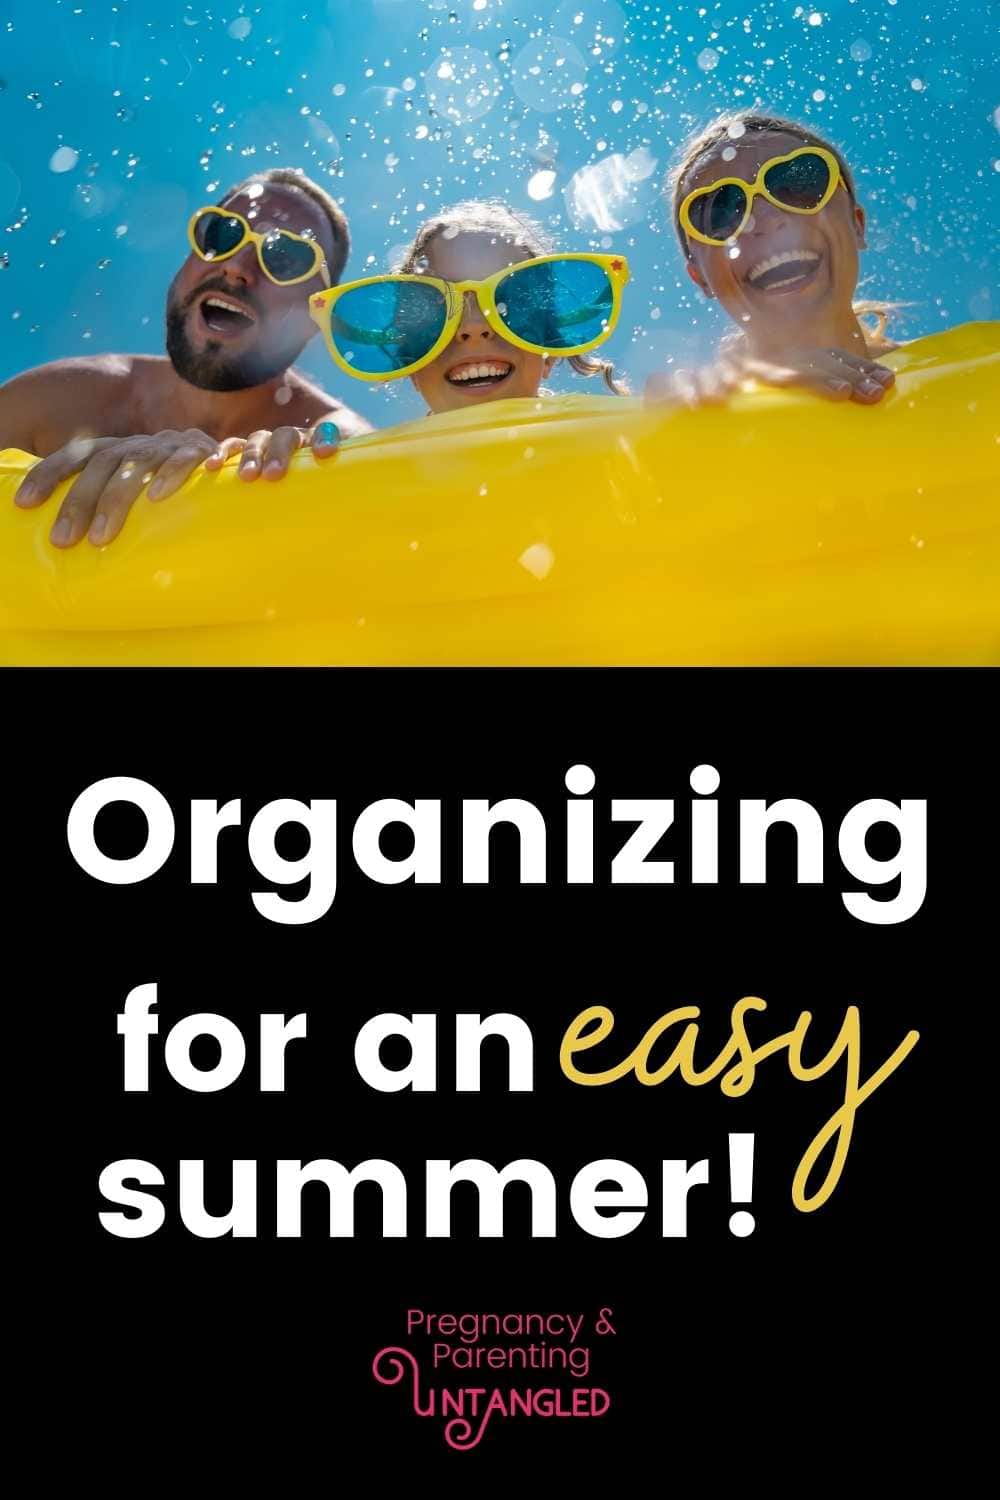 Let's get ORGANIZED to have a great summer. A bit of preparation in advance can totally set your family up for a fun stress-free summer! via @pullingcurls